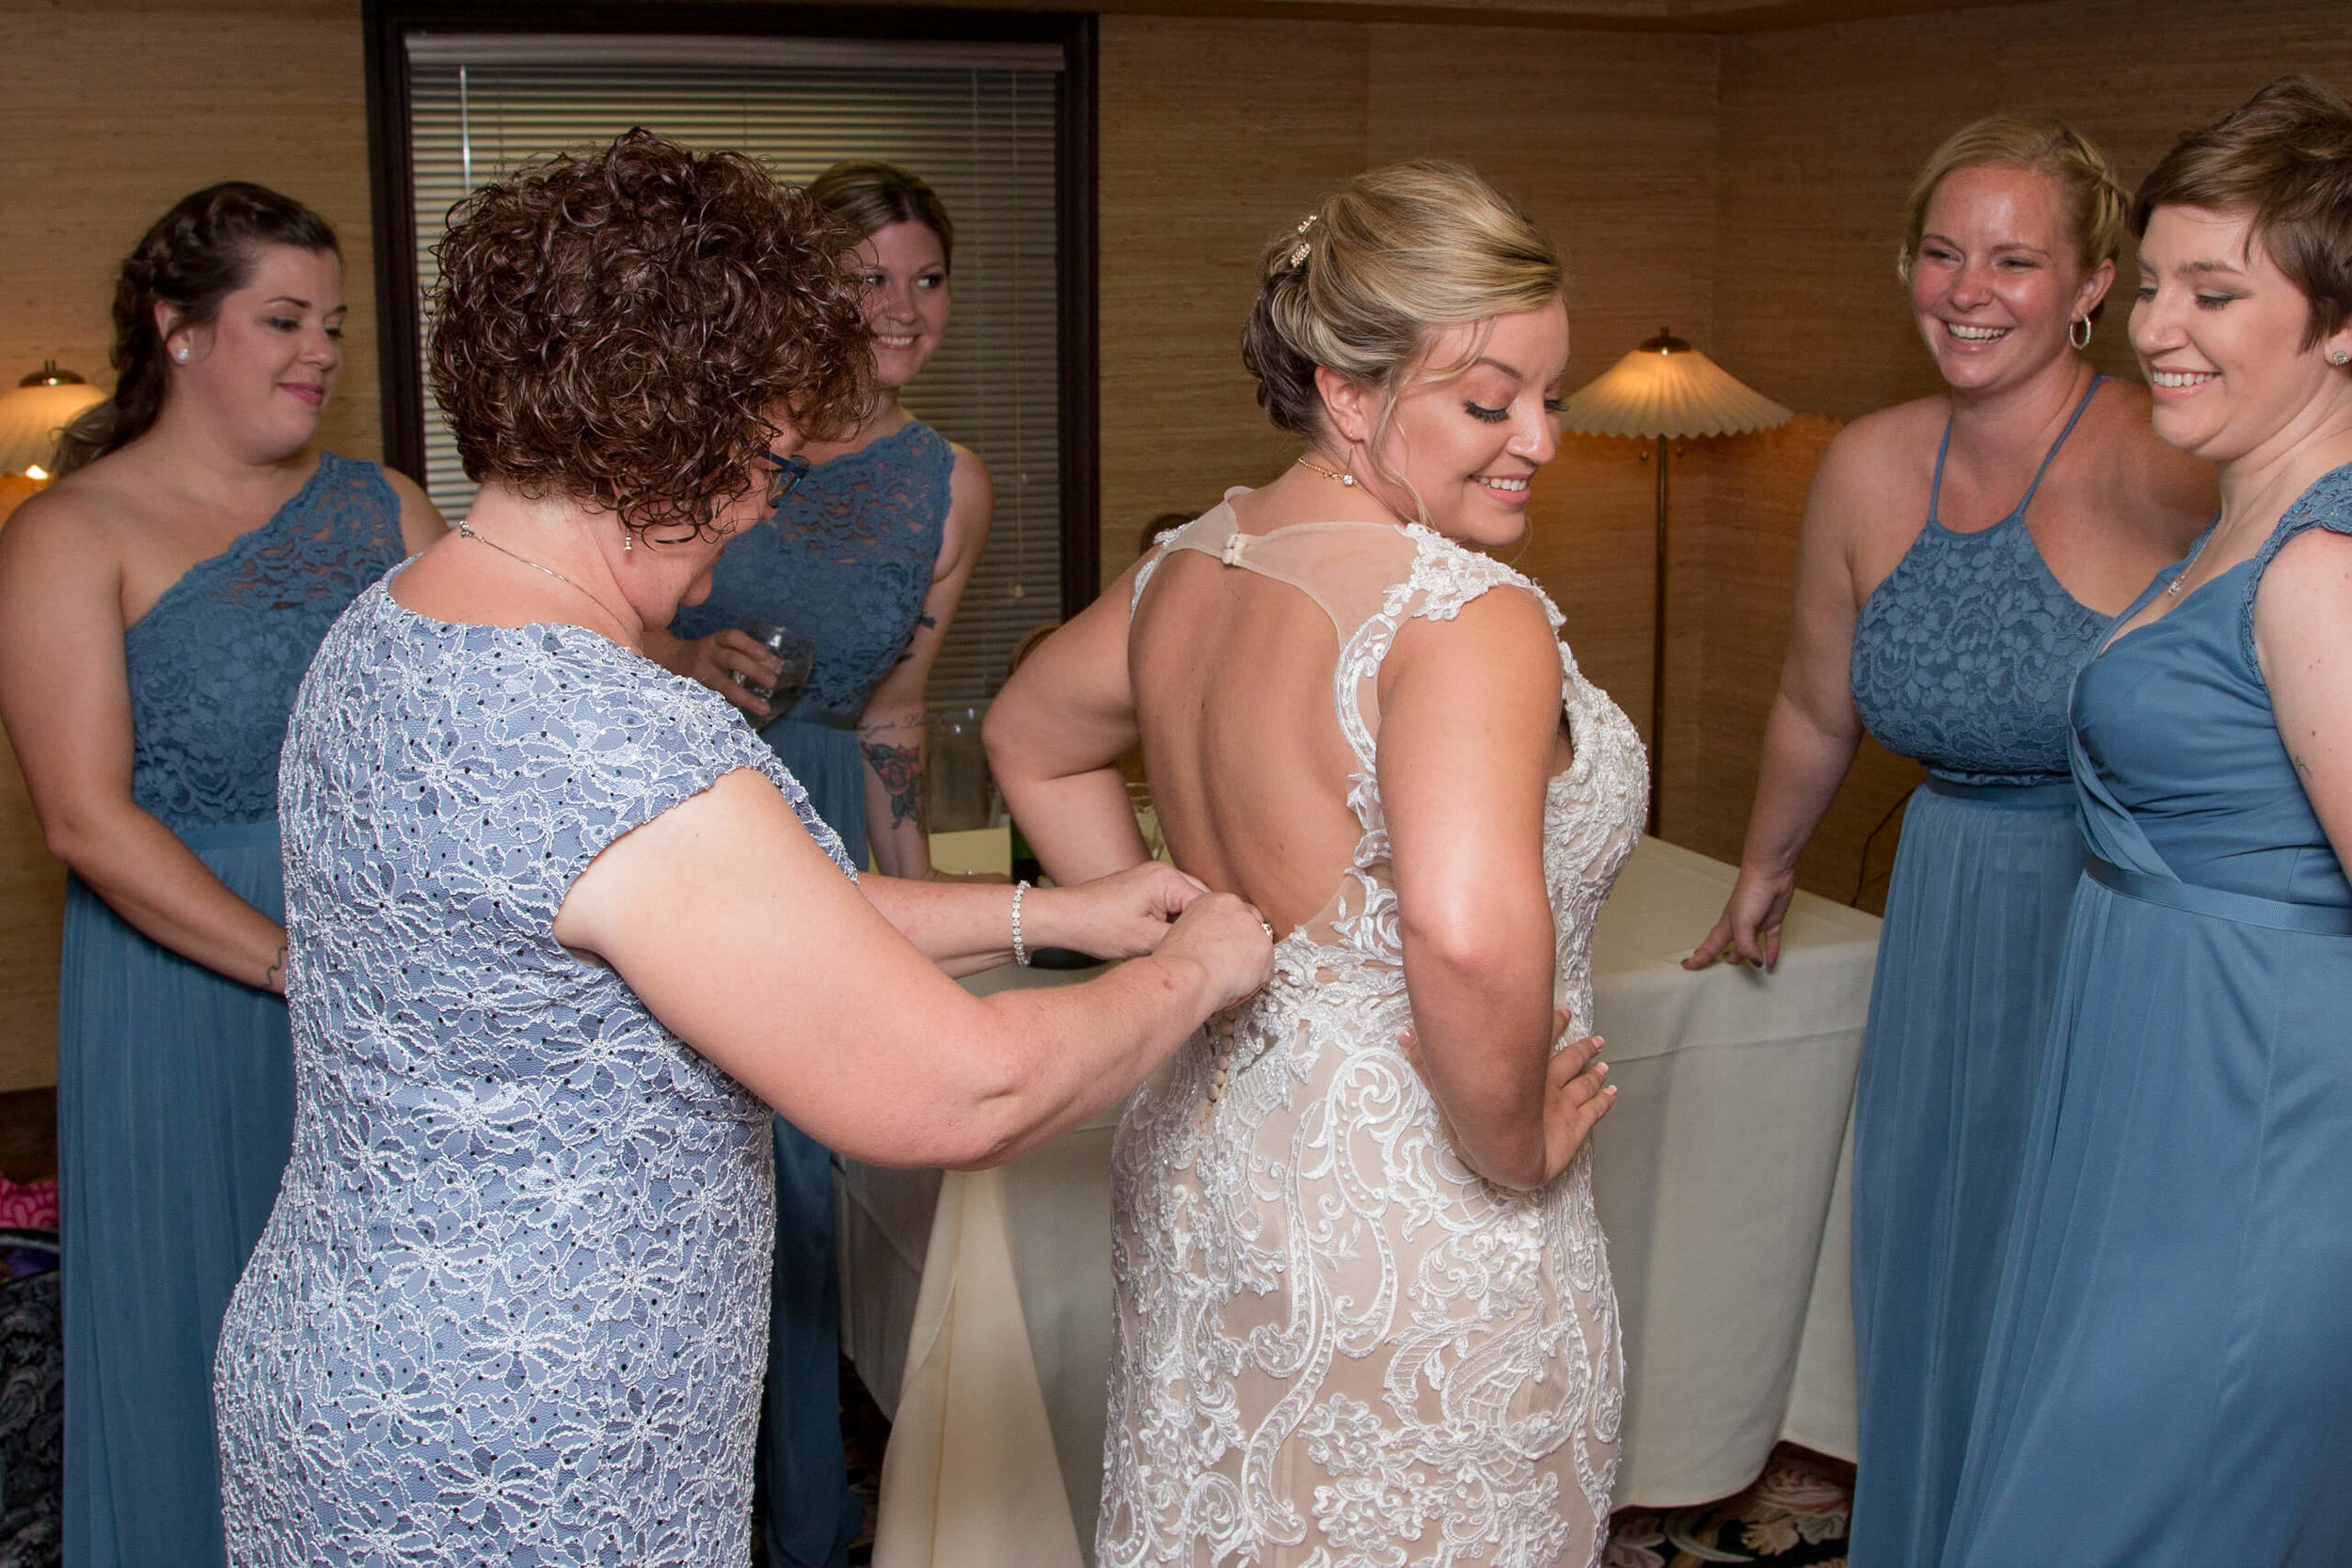 pittsburgh-wedding-dress-alterations-exquisite-fit-bridal-alterations-hollie-m-testimonial-review-0.jpg